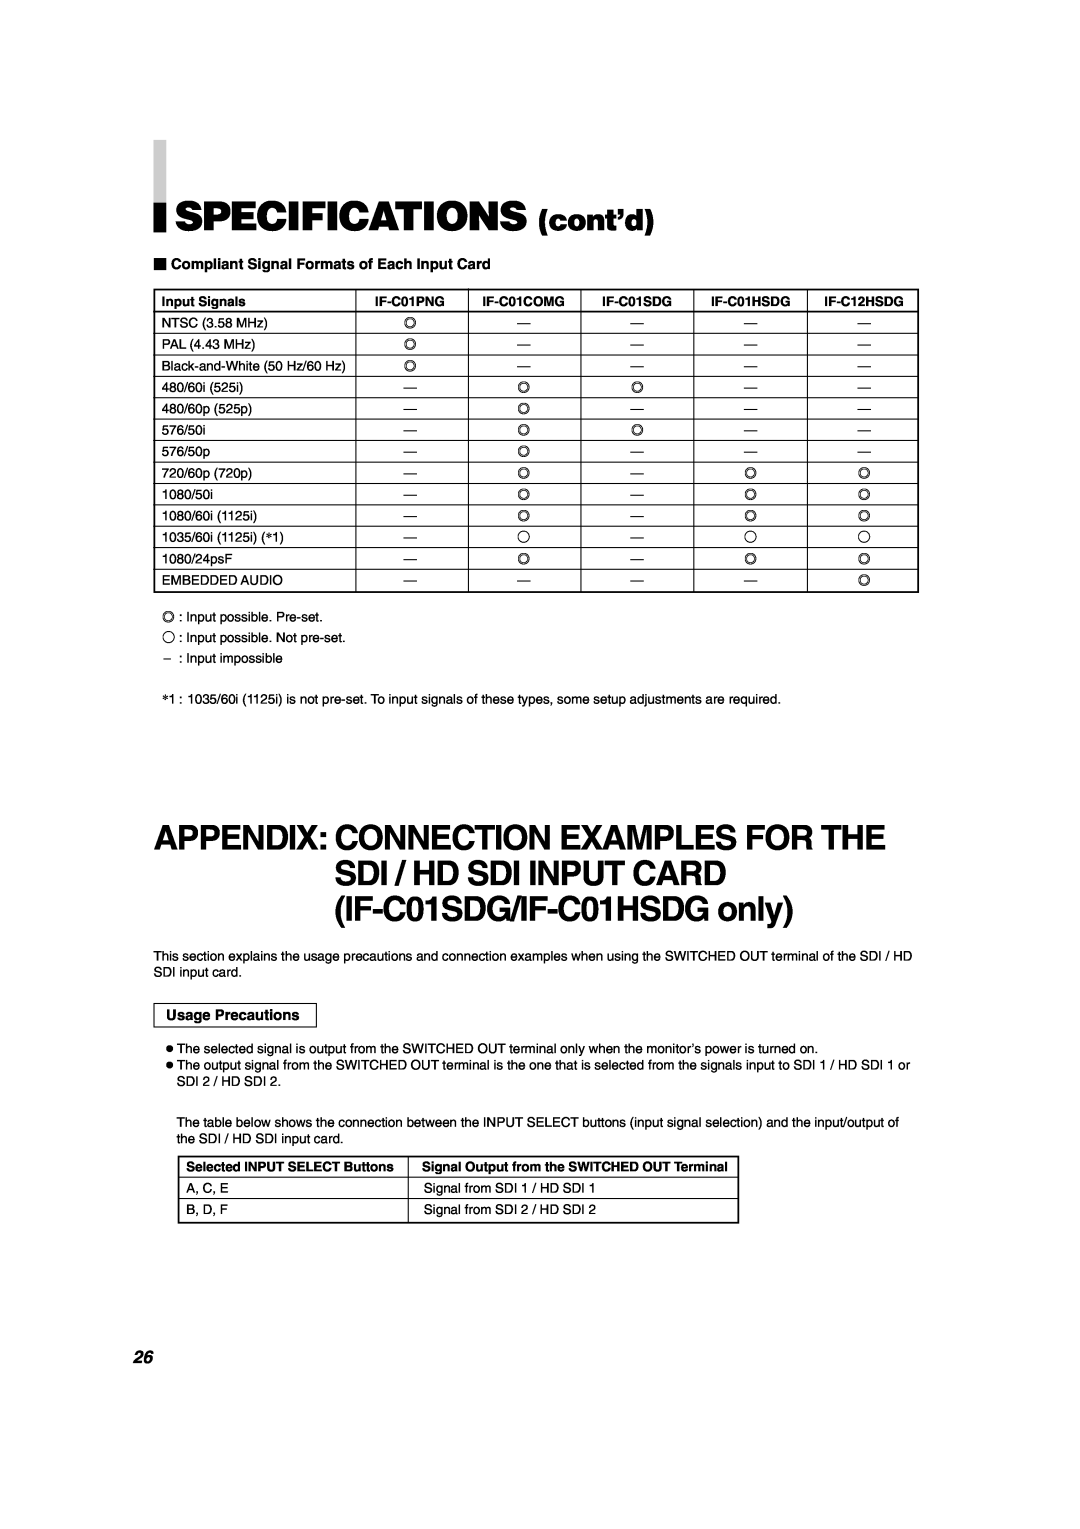 JVC DT-V1900CG manual SPECIFICATIONS cont’d, Appendix Connection Examples For The 